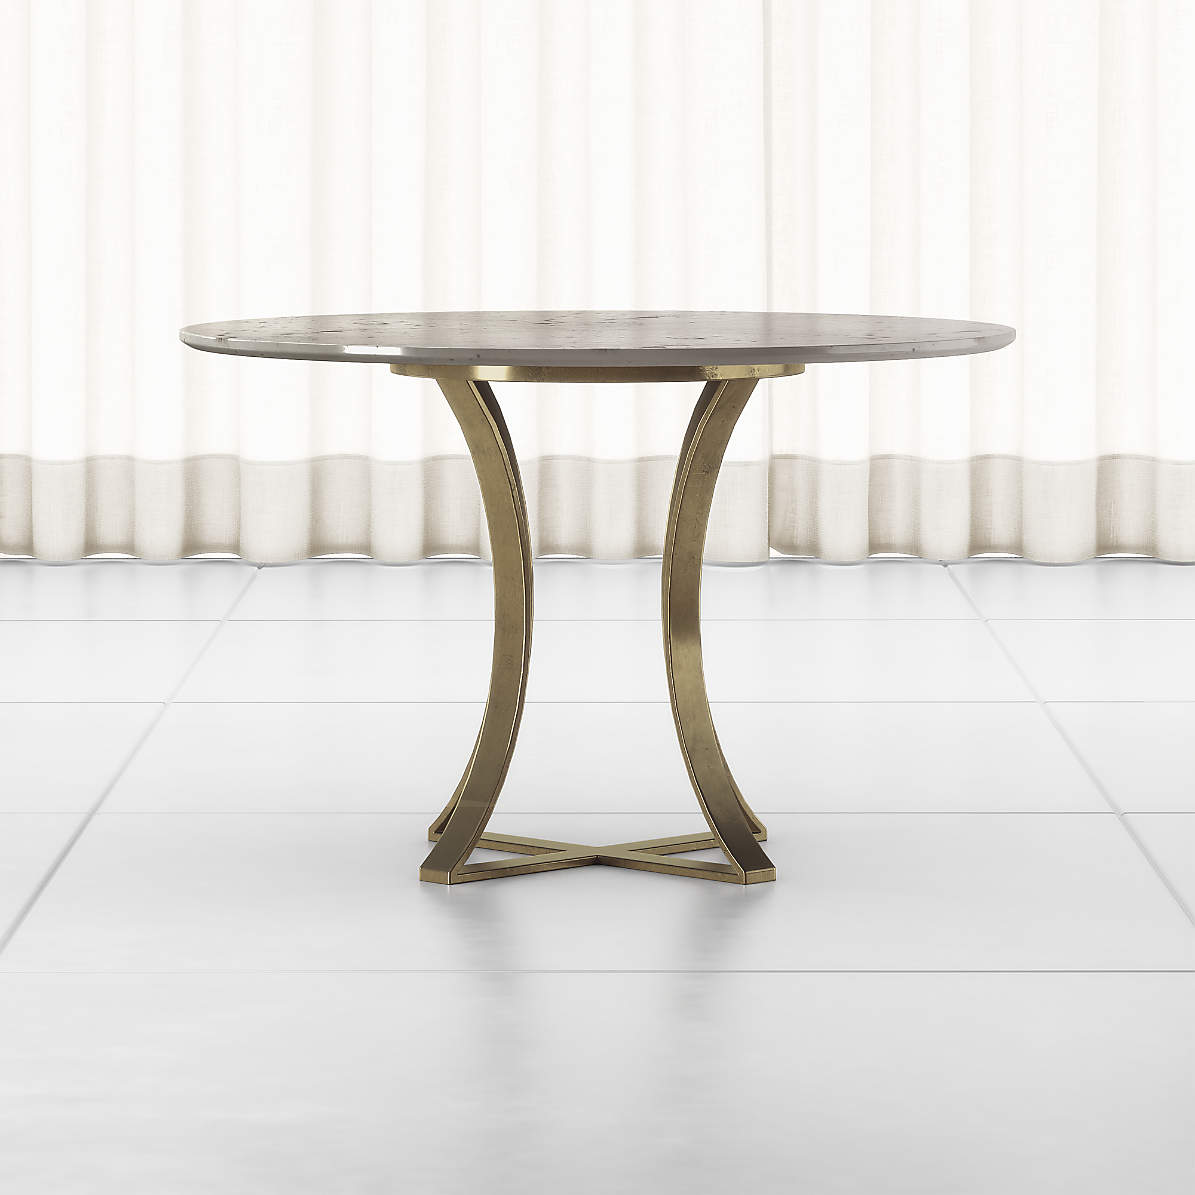 Damen 48 White Marble Top Dining Table, 48 Round Pedestal Dining Table White